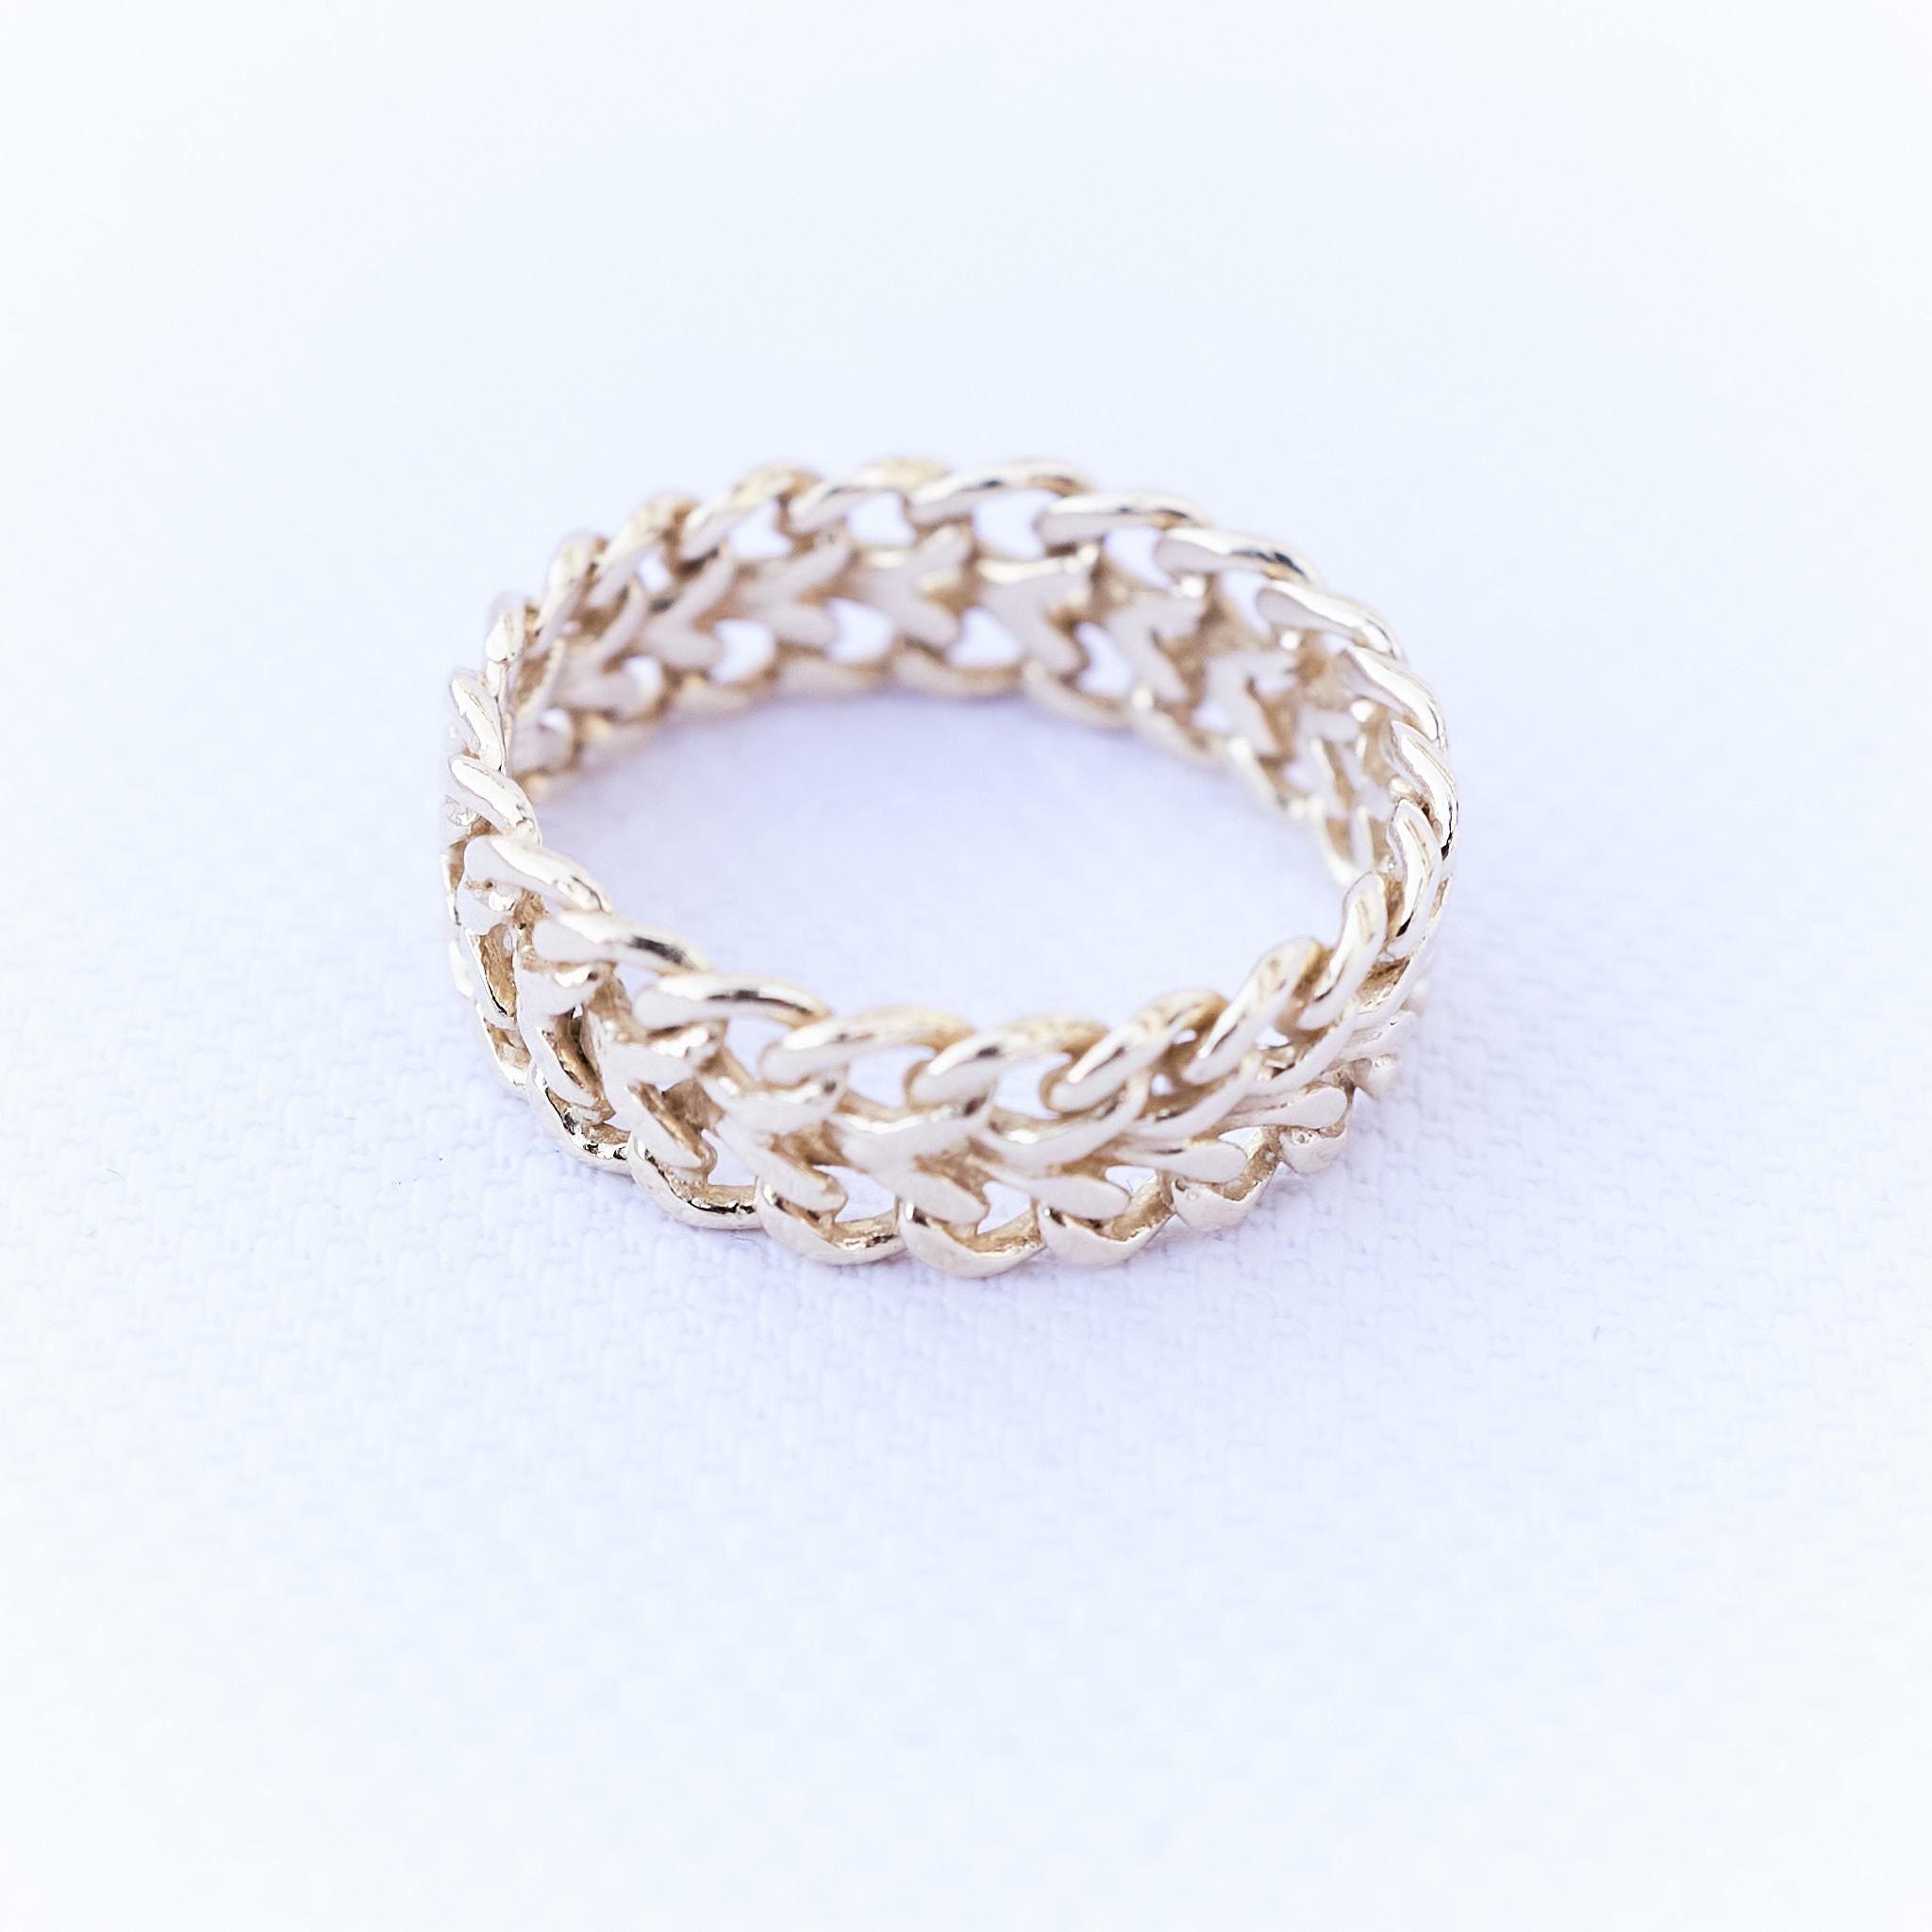 Gold Chain Ring Unisex J Dauphin
Engagement Or Wedding Ring, Fashion Ring

J Dauphin jewelry is hand made in Los Angeles and was created by designer Johanna Dauphin. Most of the jewelry is unique or created in small series. Every gem is individually